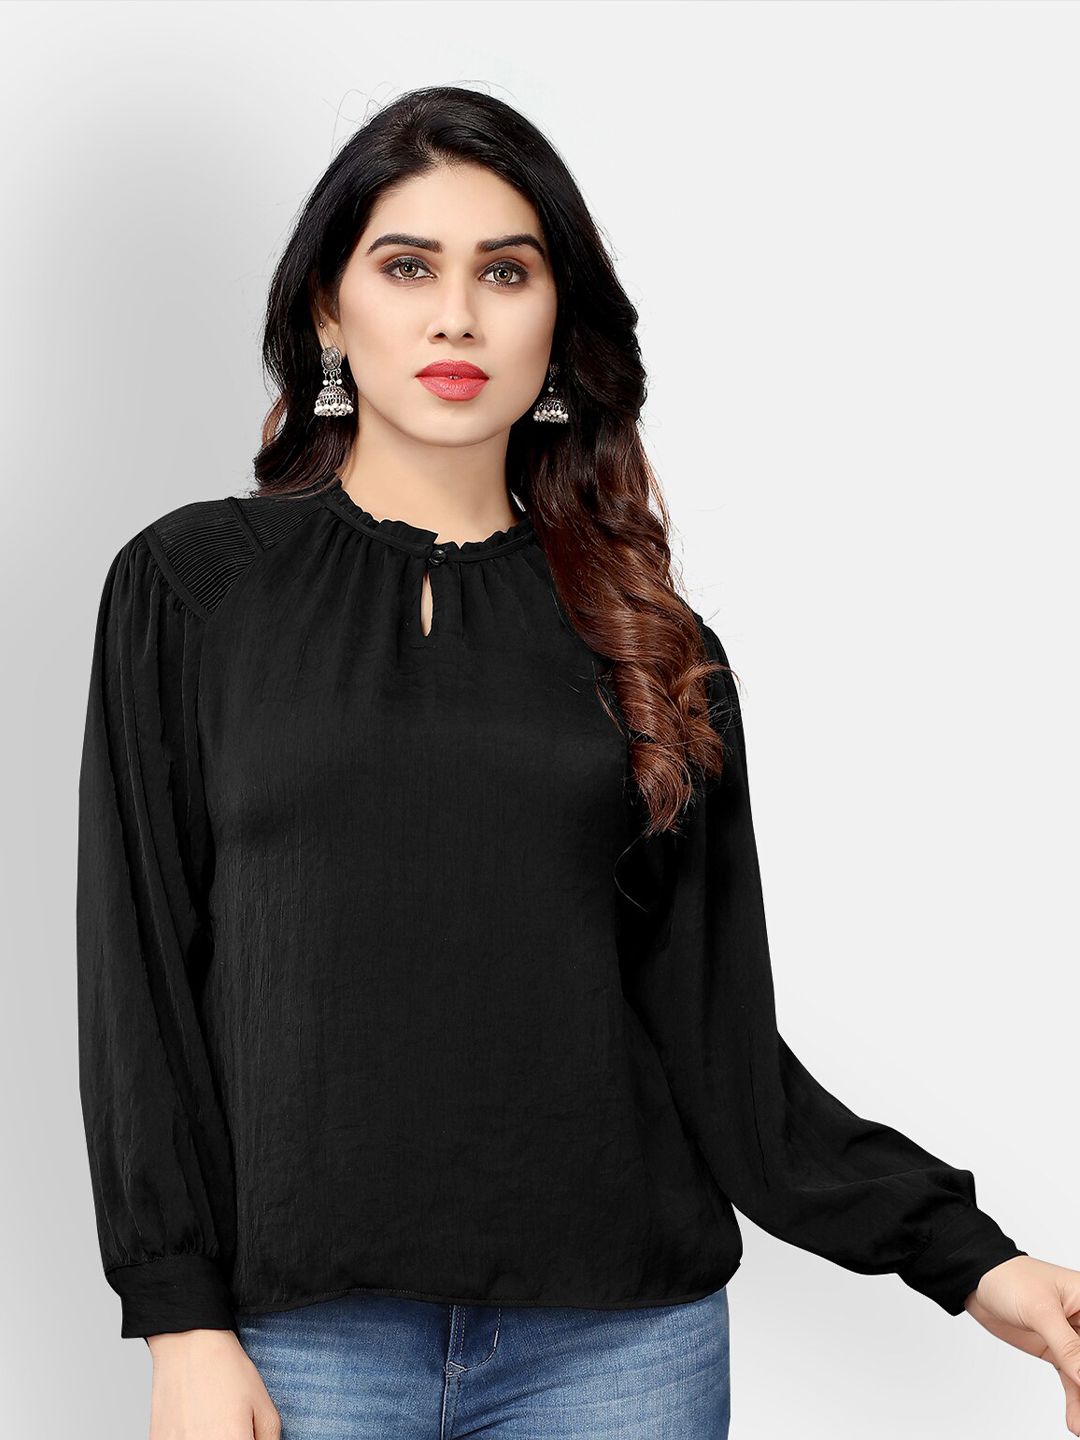 Mclothings Keyhole Neck Satin Top Price in India